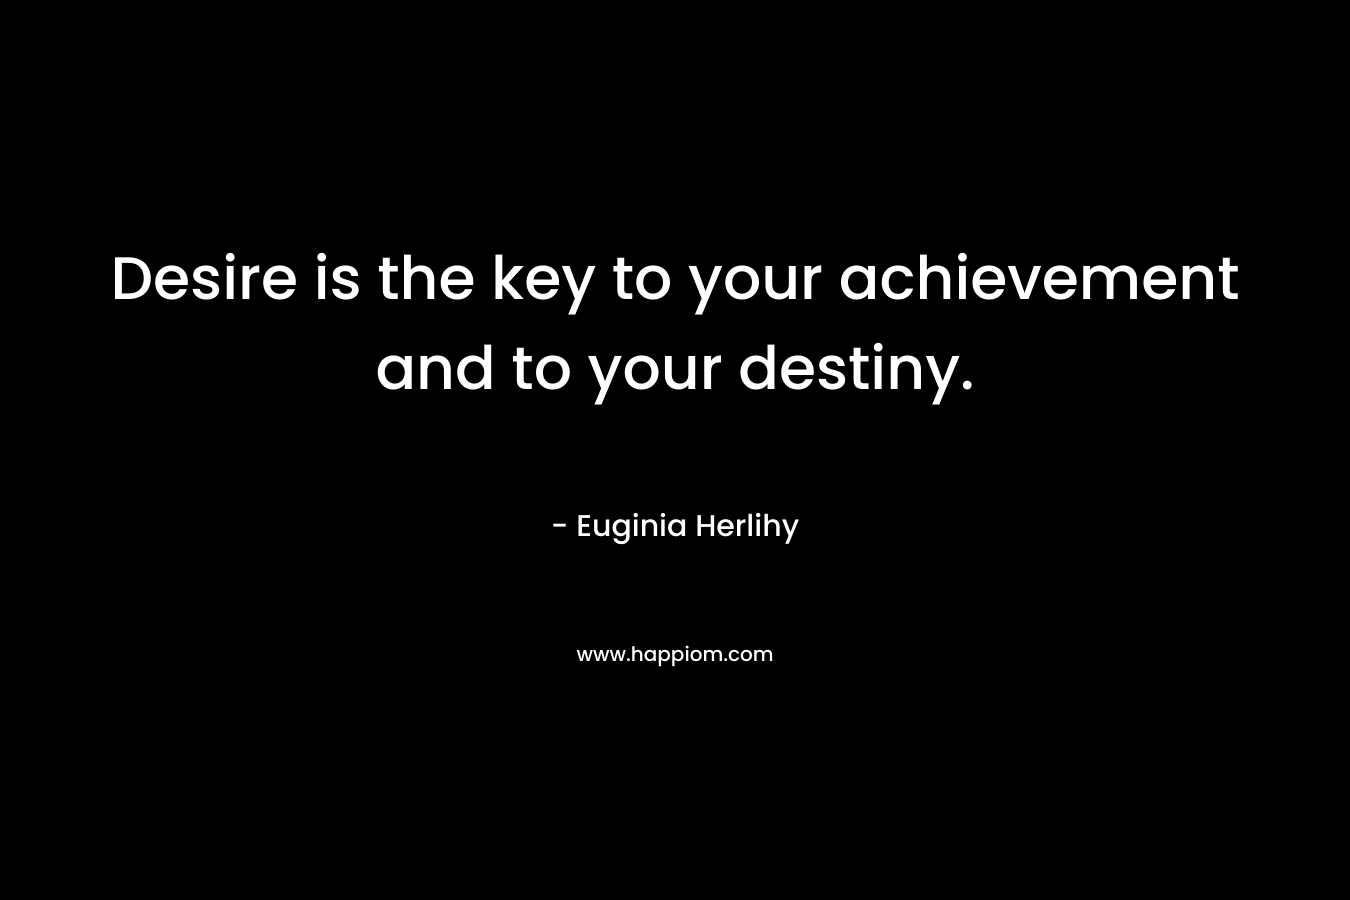 Desire is the key to your achievement and to your destiny.